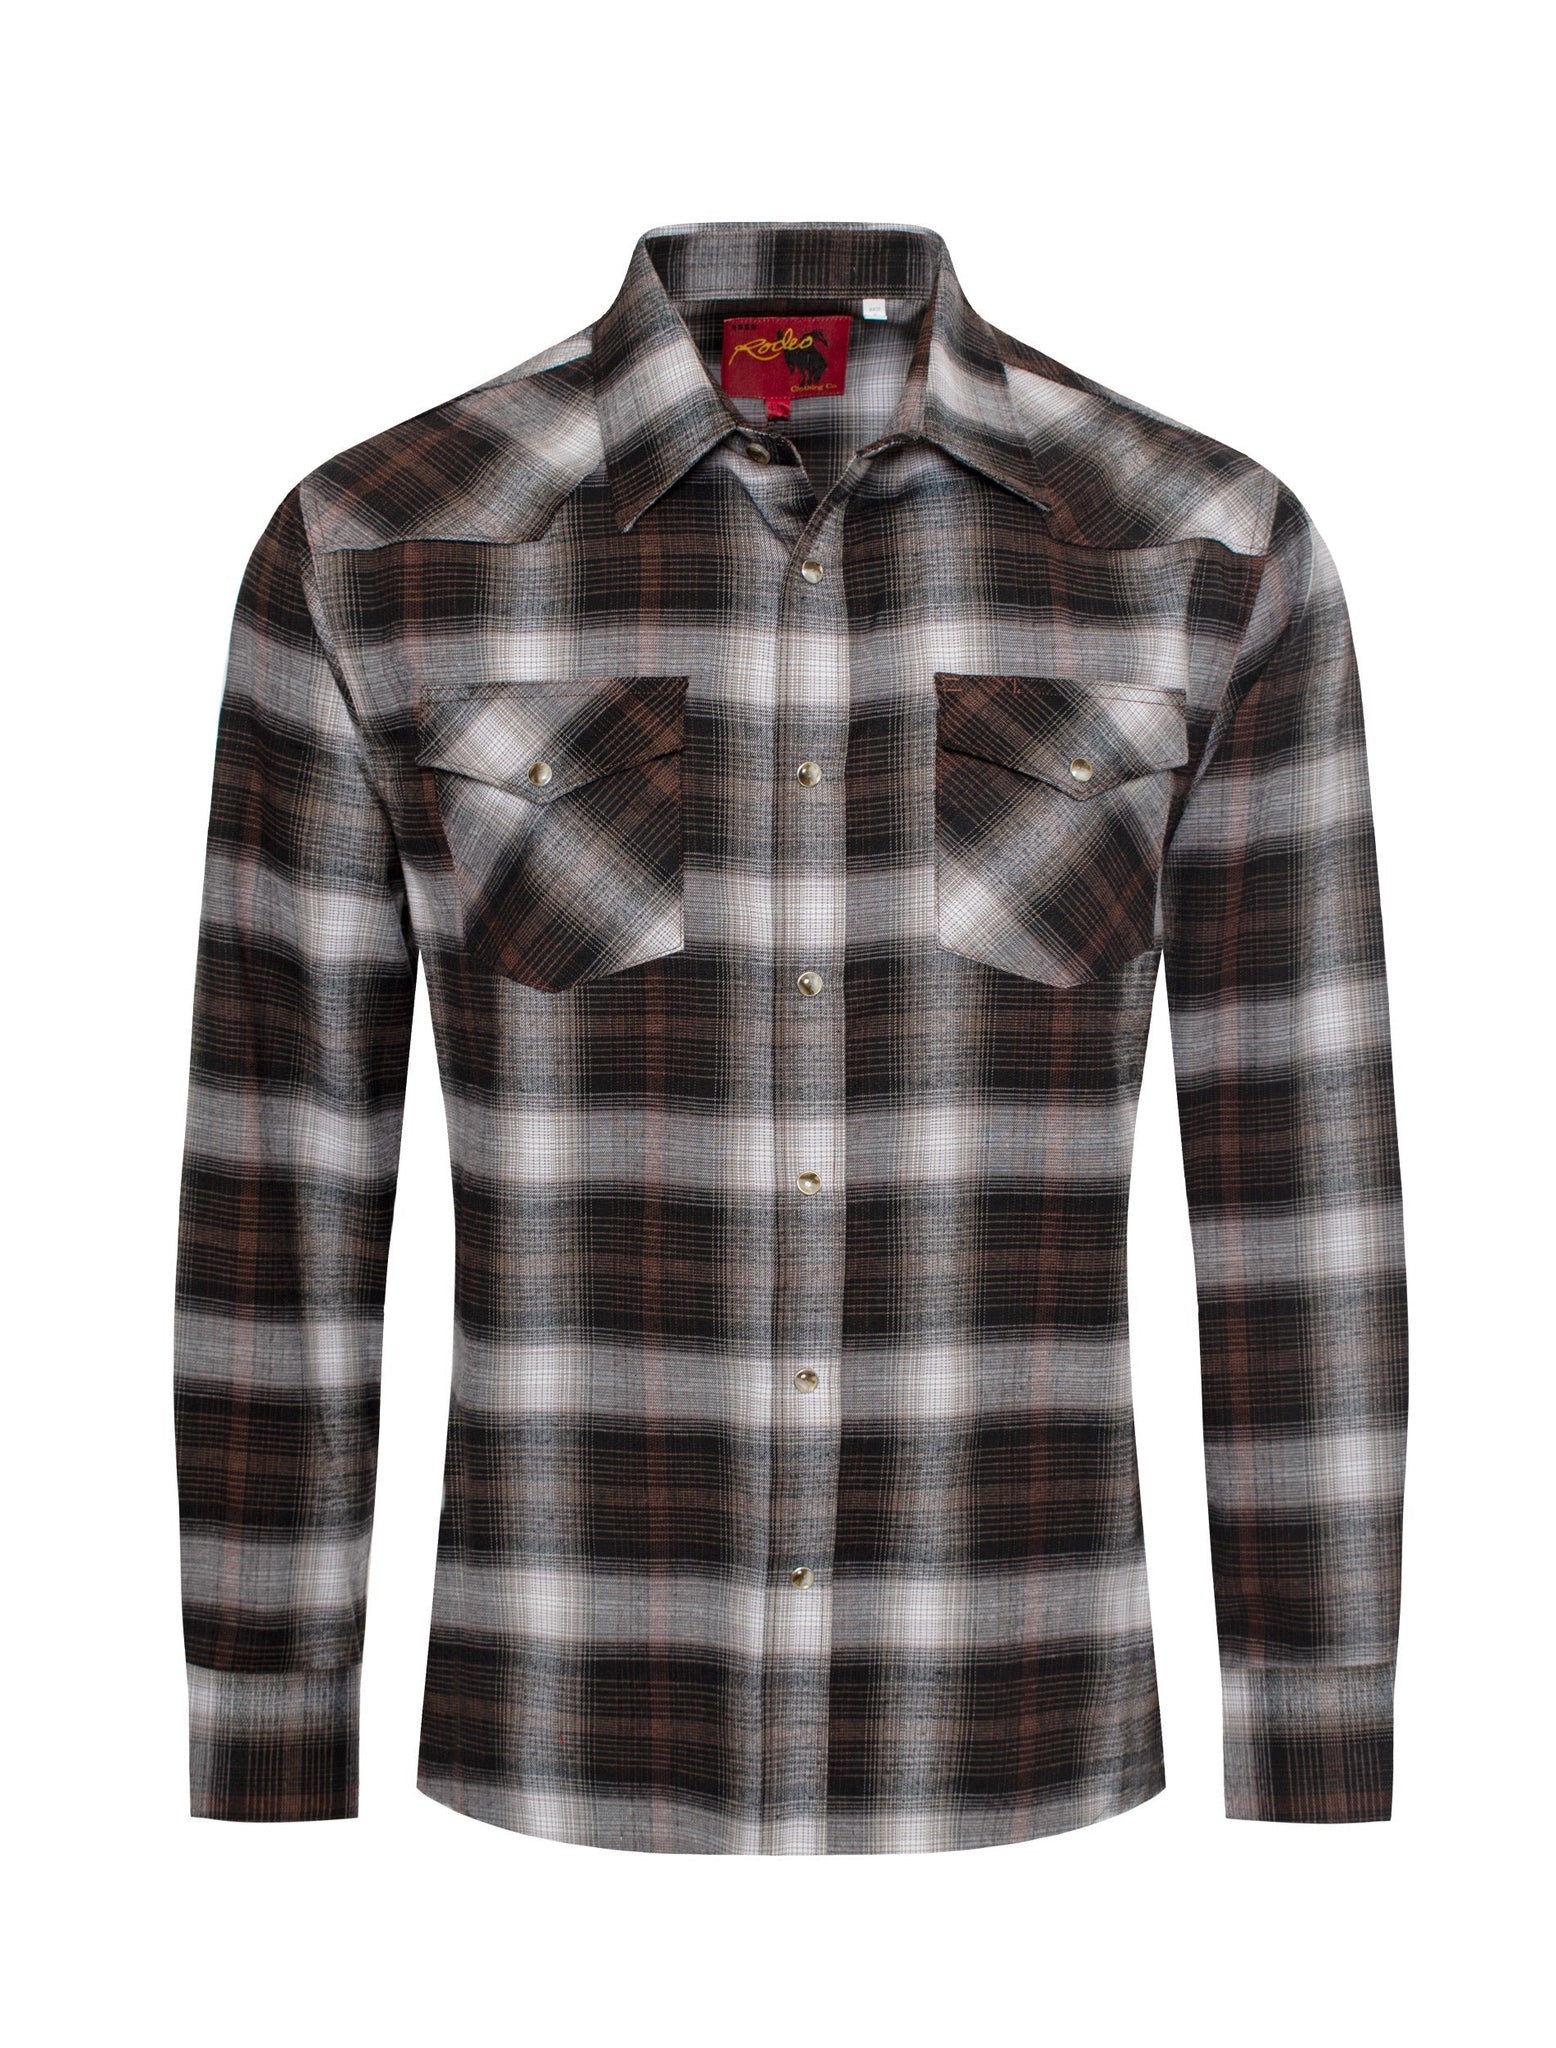 Men's Western Flannel Shirts With Snap Buttons -FLS300-305